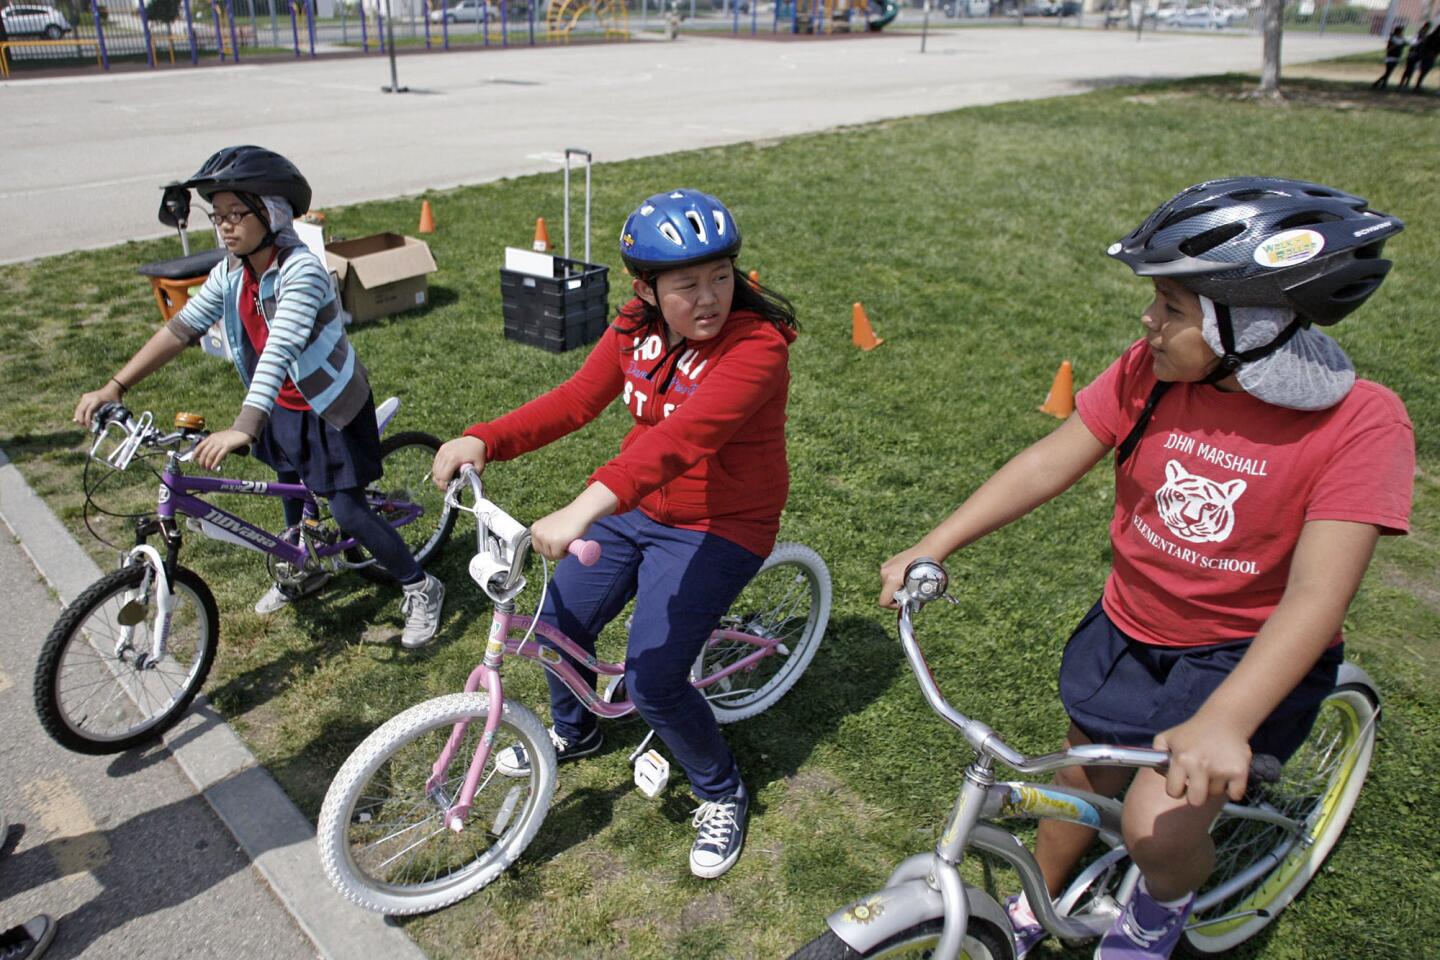 Fifth-grade students Francine Fernandez, 10, from left, Jenelle Velsa, 11, and Dulce Aguilar, 11, rest on their bikes before learning safety tips during bike skills safety week, which took place at John Marshall Elementary School in Glendale on Friday, April 5, 2013. 93 students from the school participated in the event.